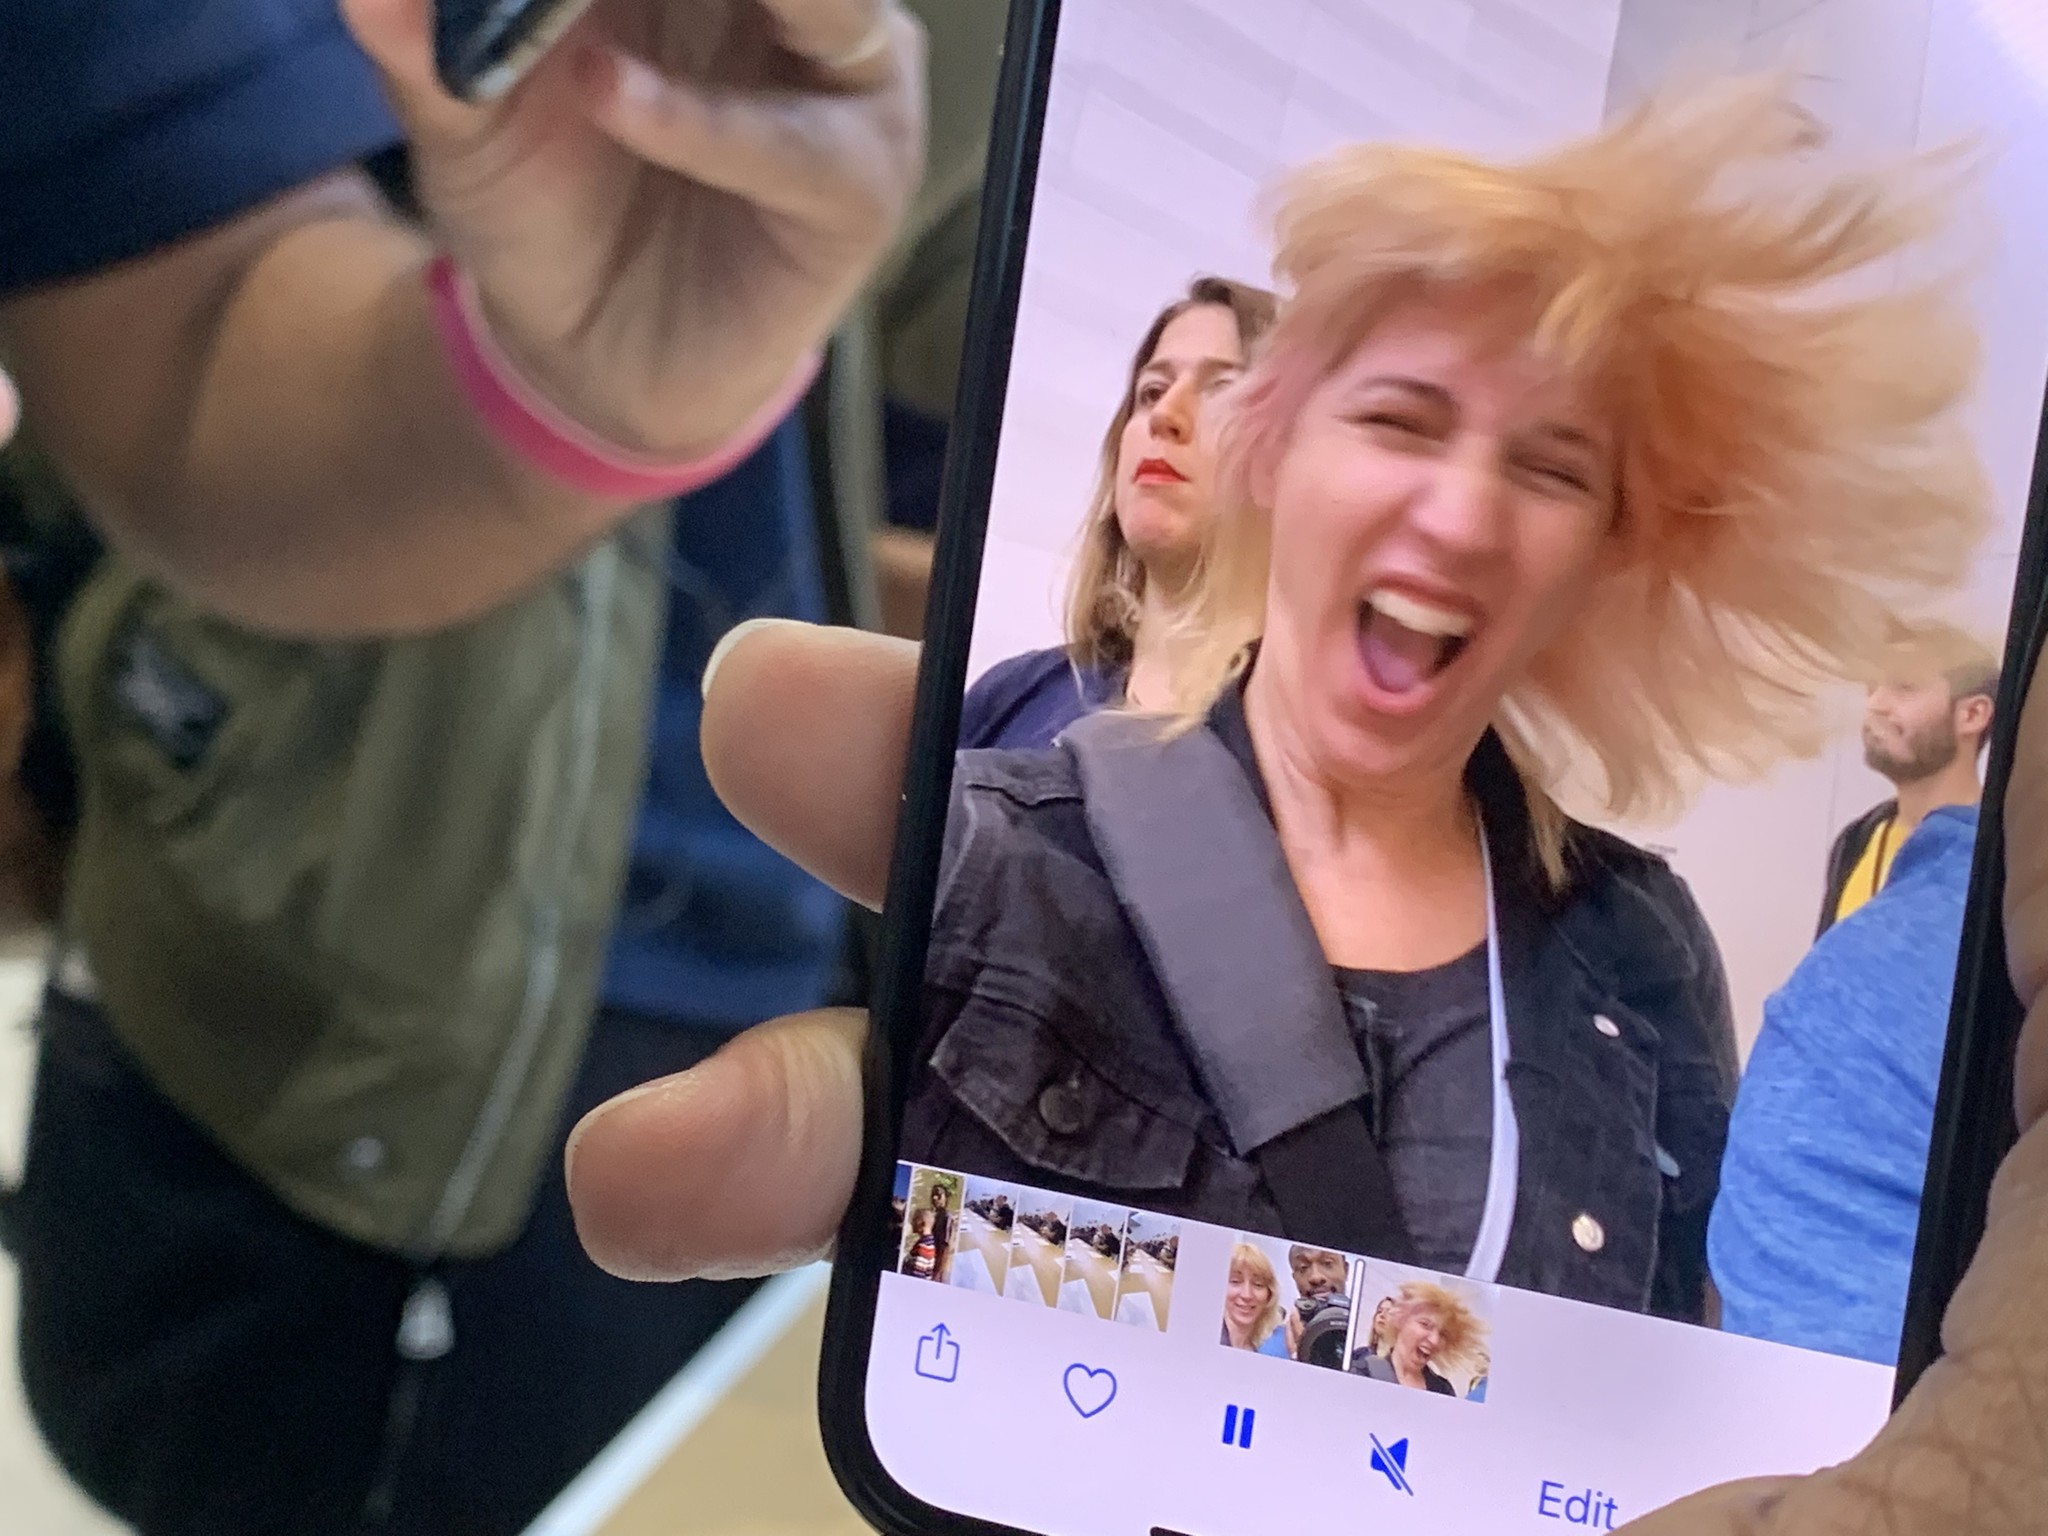 Doin' a "Slo-fie" at the Apple Event in September